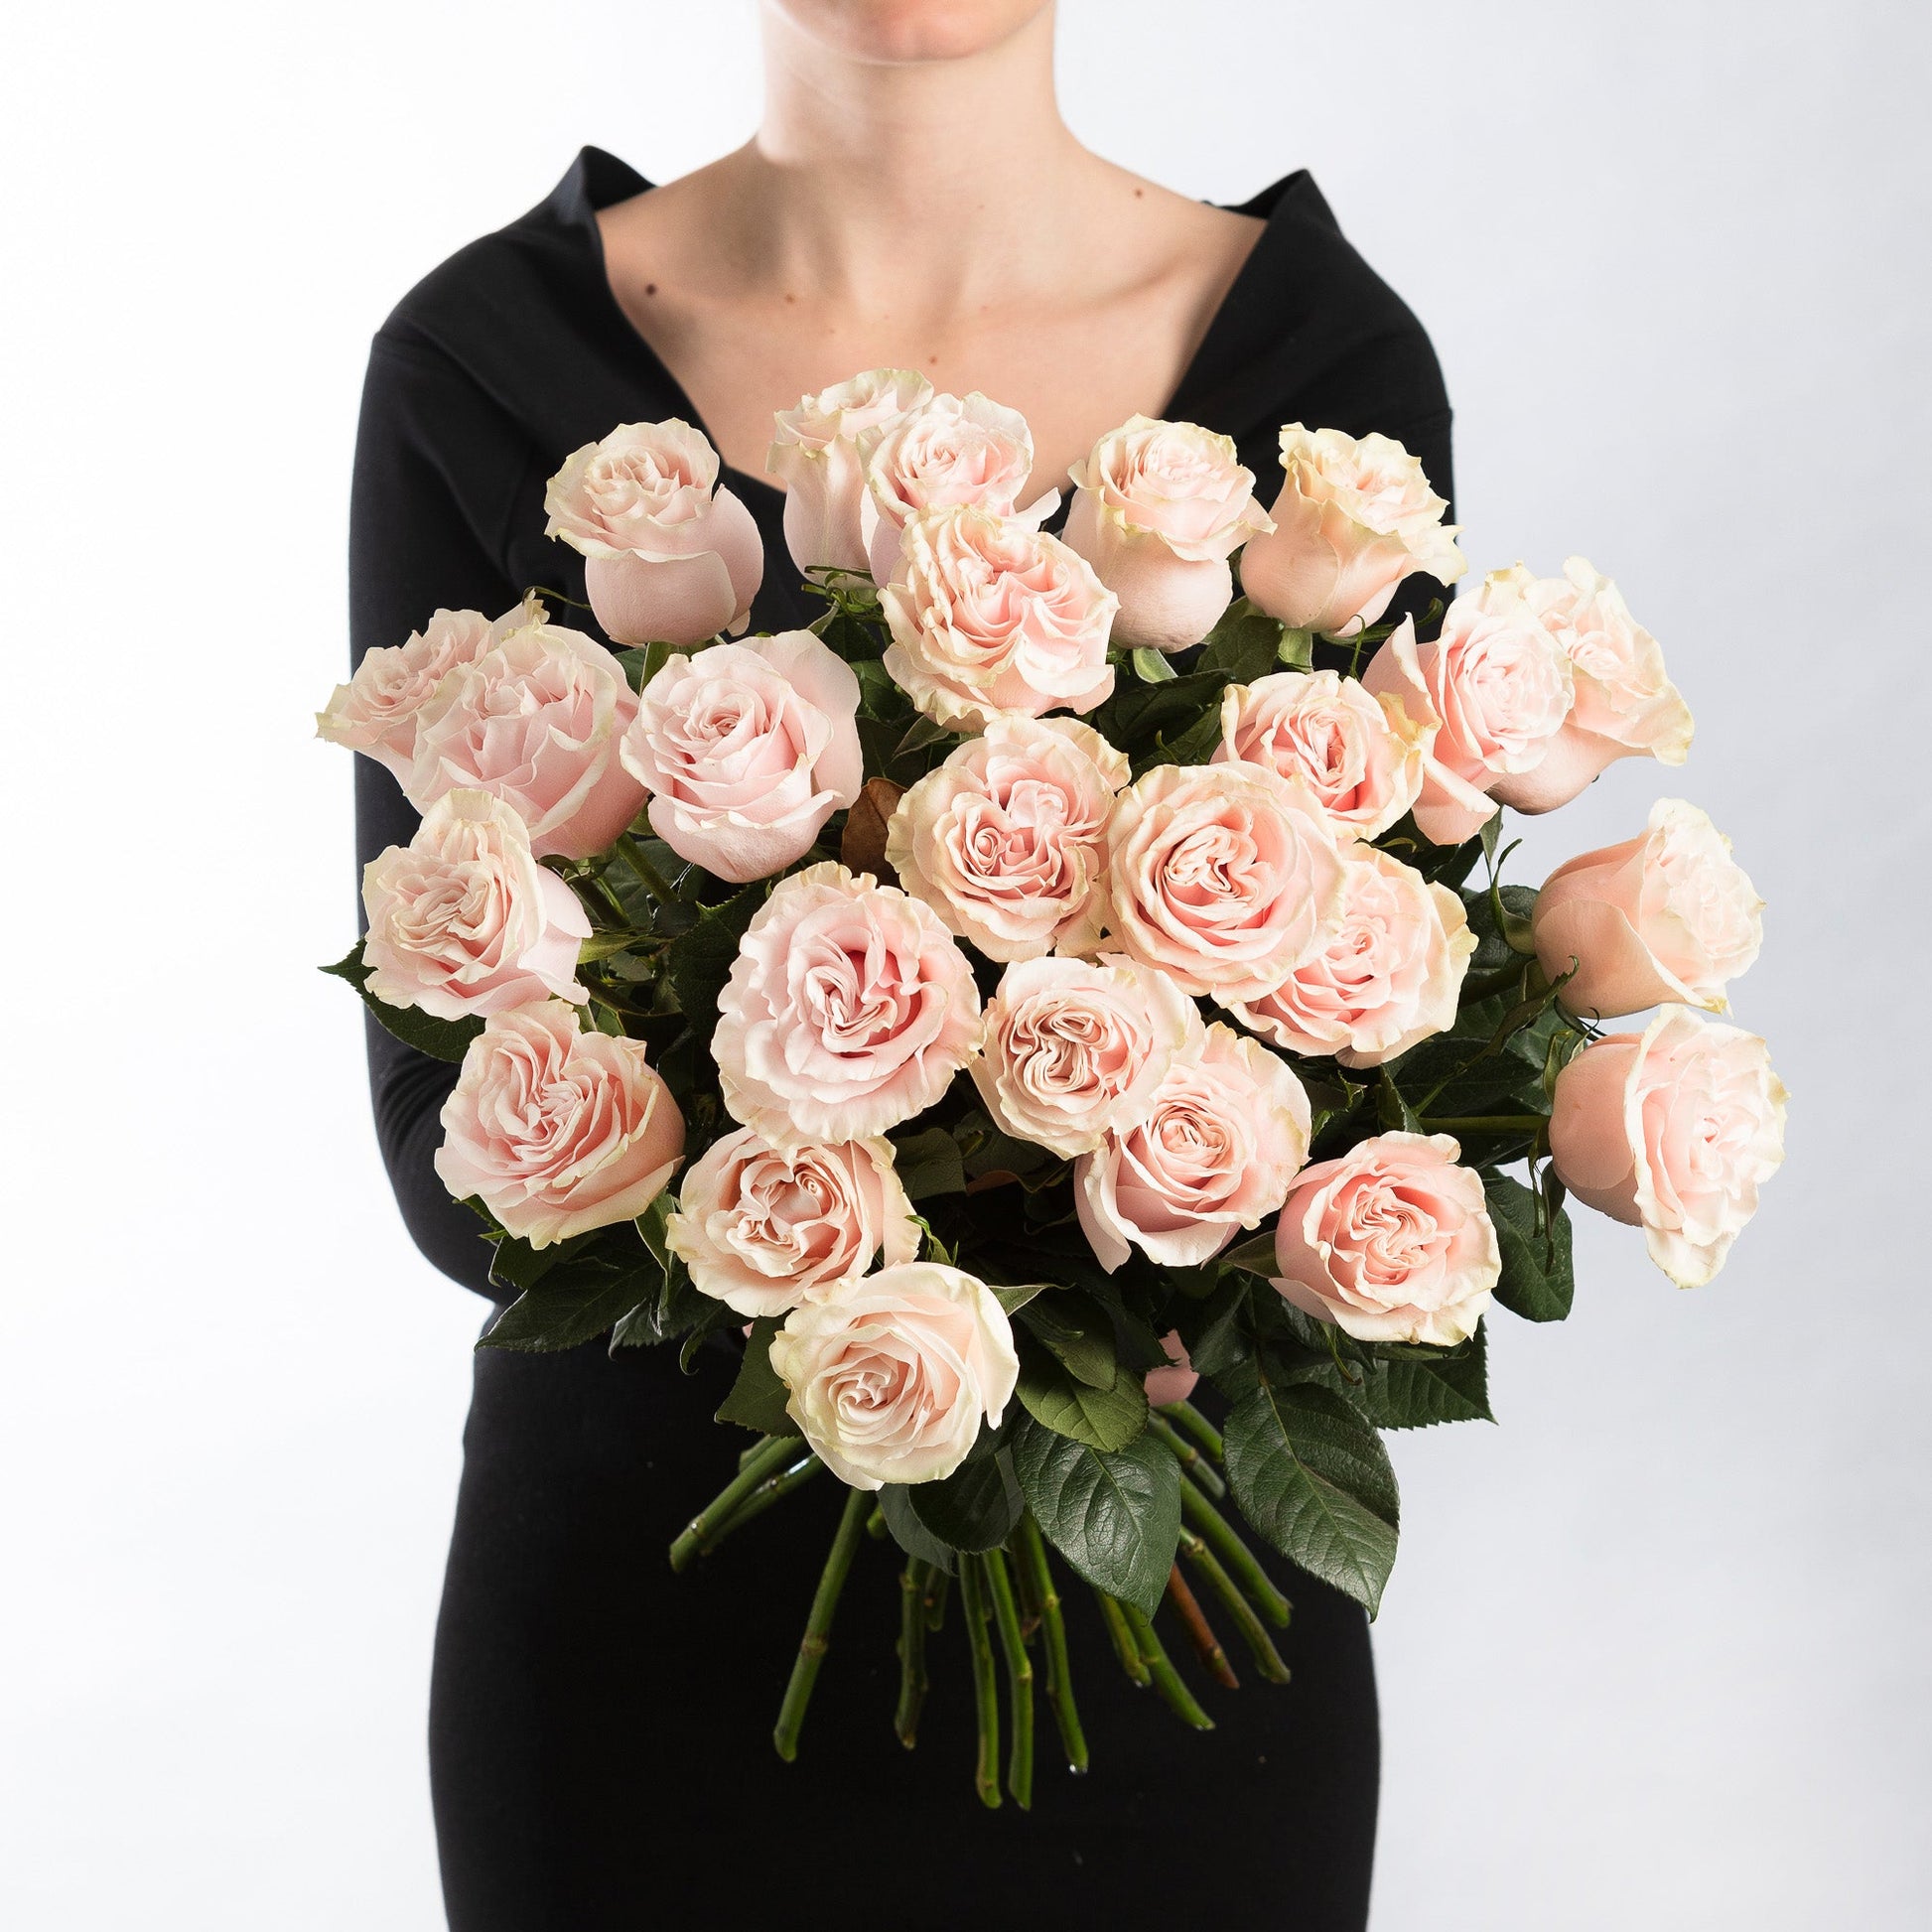 Woman wearing a black dress, holding a bouquet of premium soft pink roses.